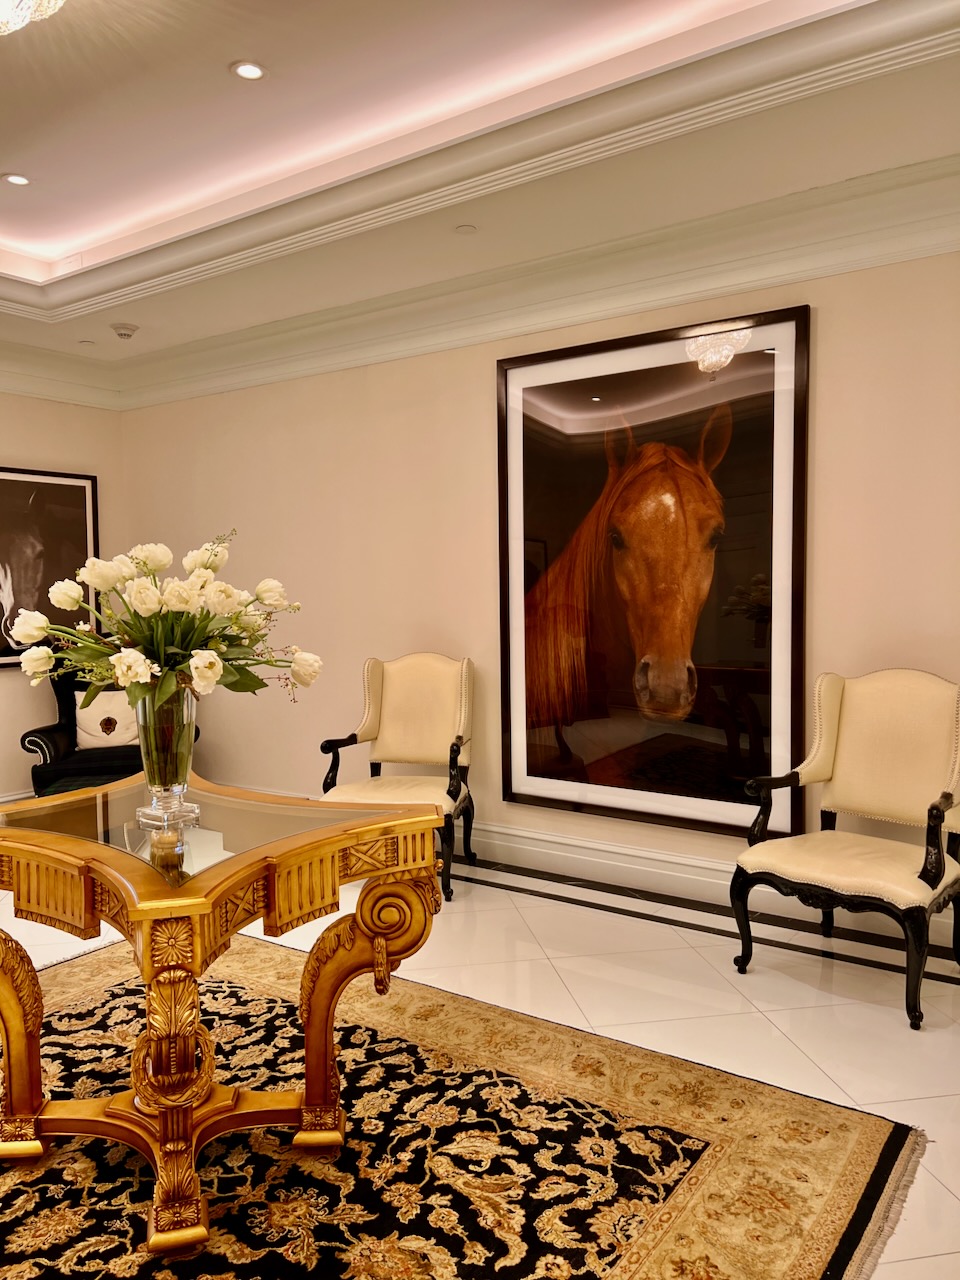 The lobby of the Equestrian Hotel showing photos of horses.